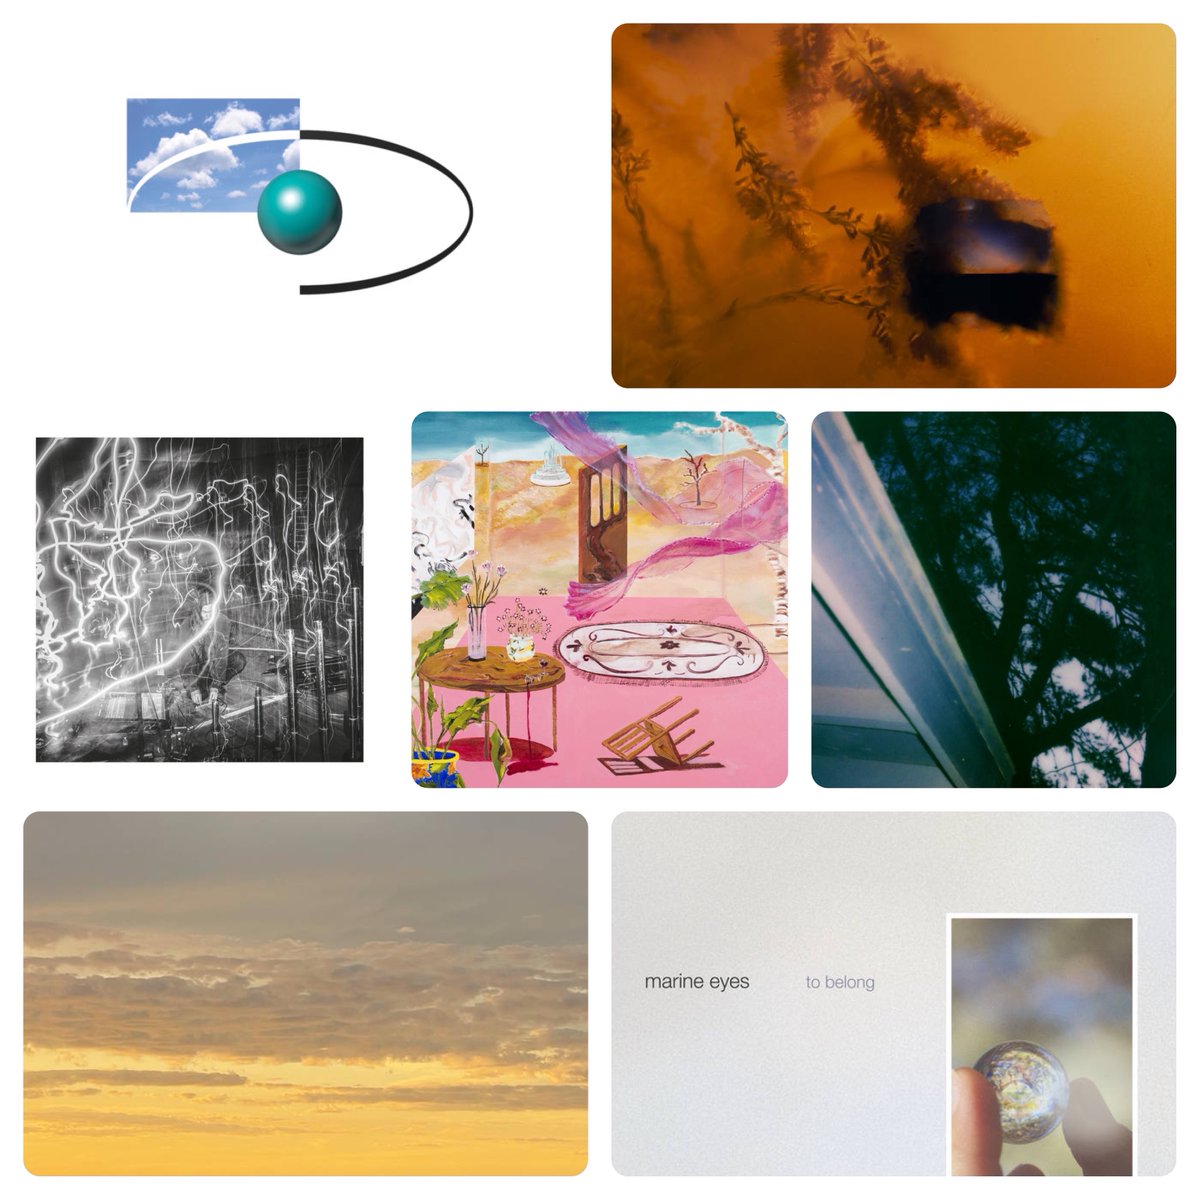 it's NEW MUSIC FRIDAY! here is our guide of ALL we are listening to today⬇️ smallalbums.com/new-music-frid…